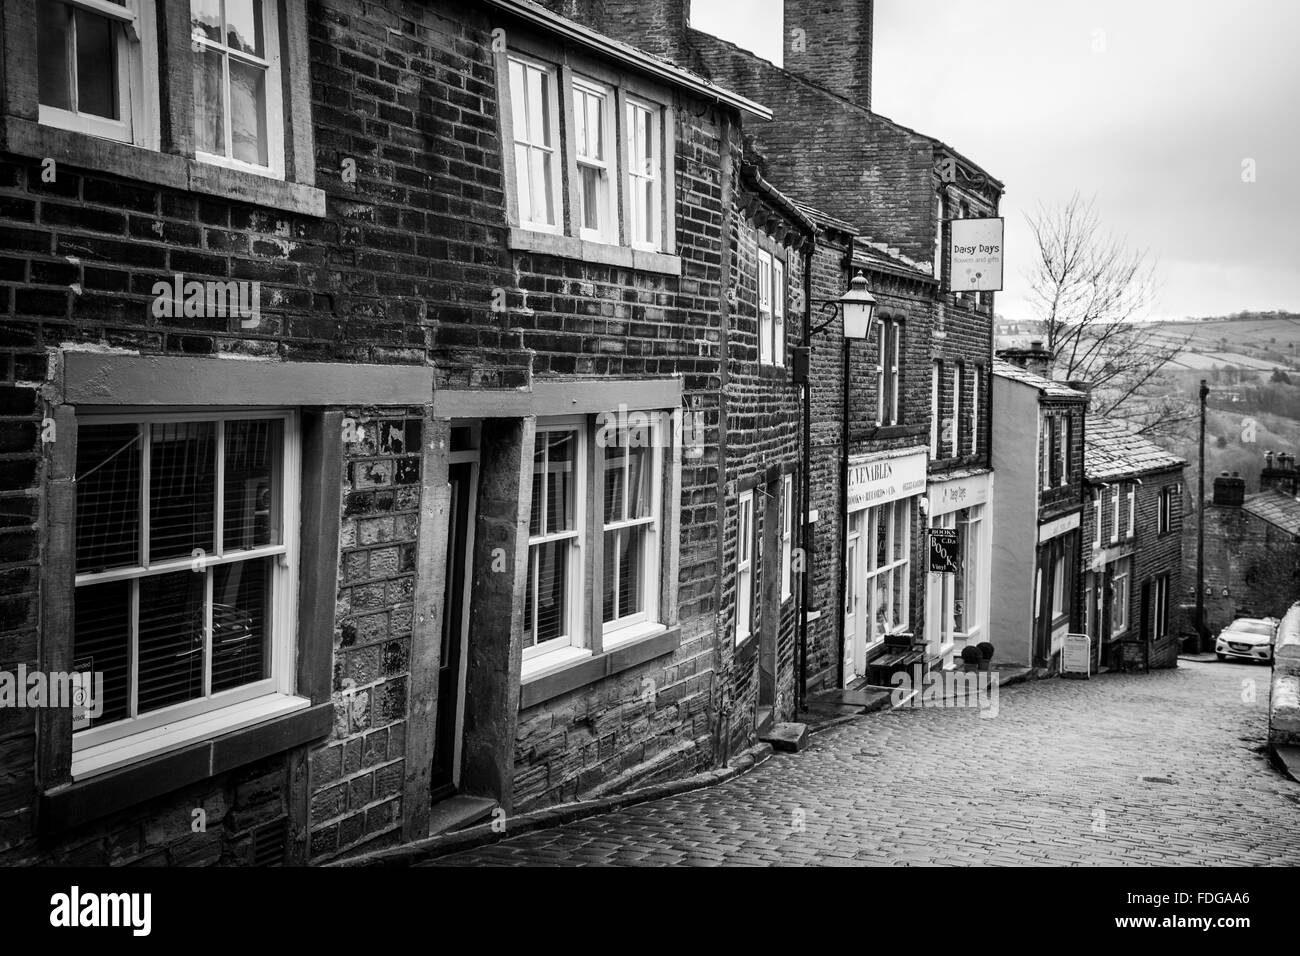 The main street in the village of Haworth, West Yorkshire, England, UK Stock Photo